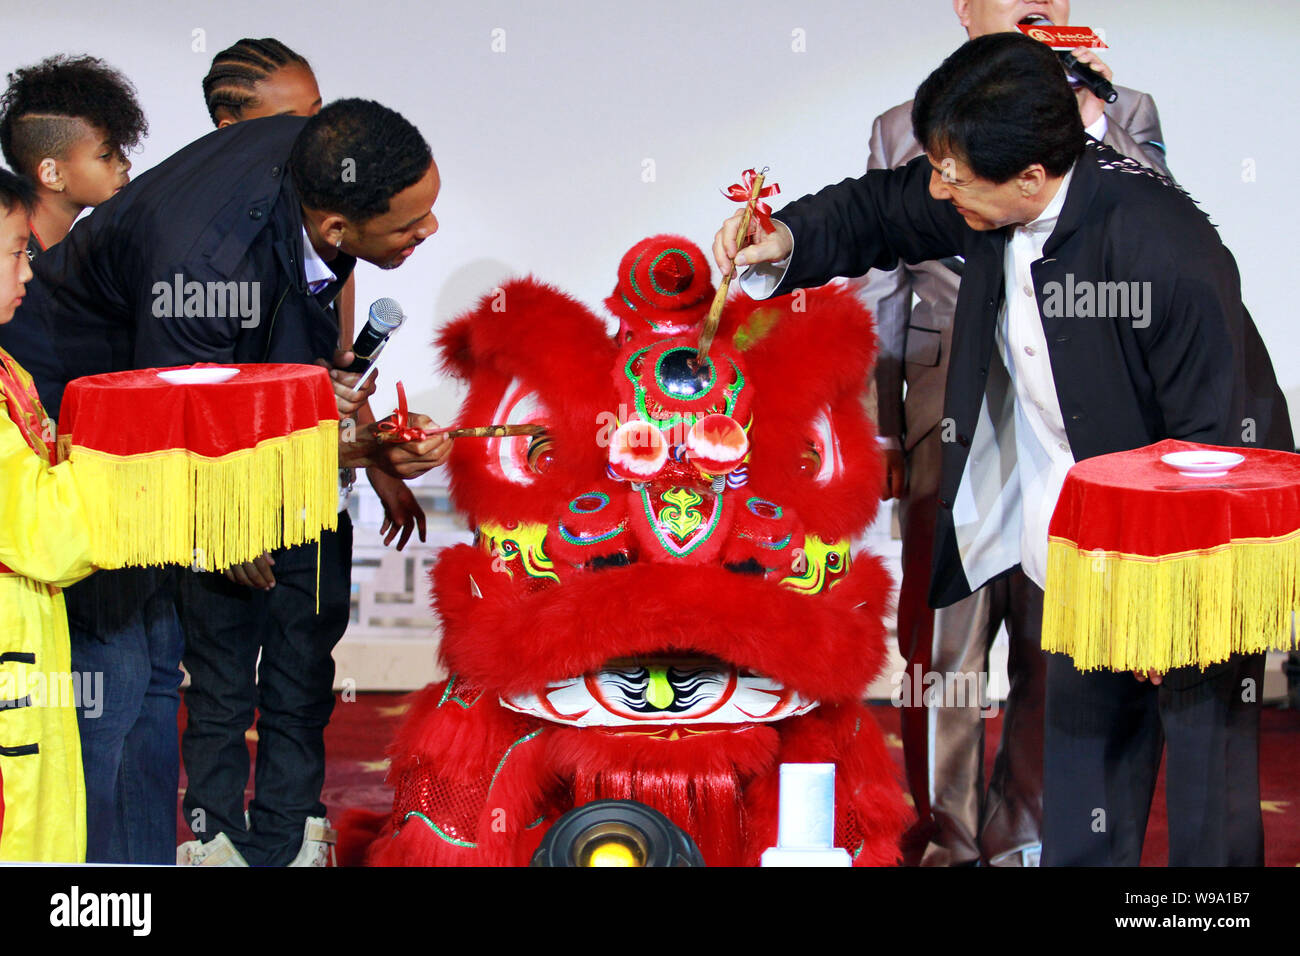 Hollywood actor Will Smith, left, and kungfu superstar Jackie Chan, right, paint a lion at the premiere of the movie, The Karate Kid, in Beijing, Chin Stock Photo